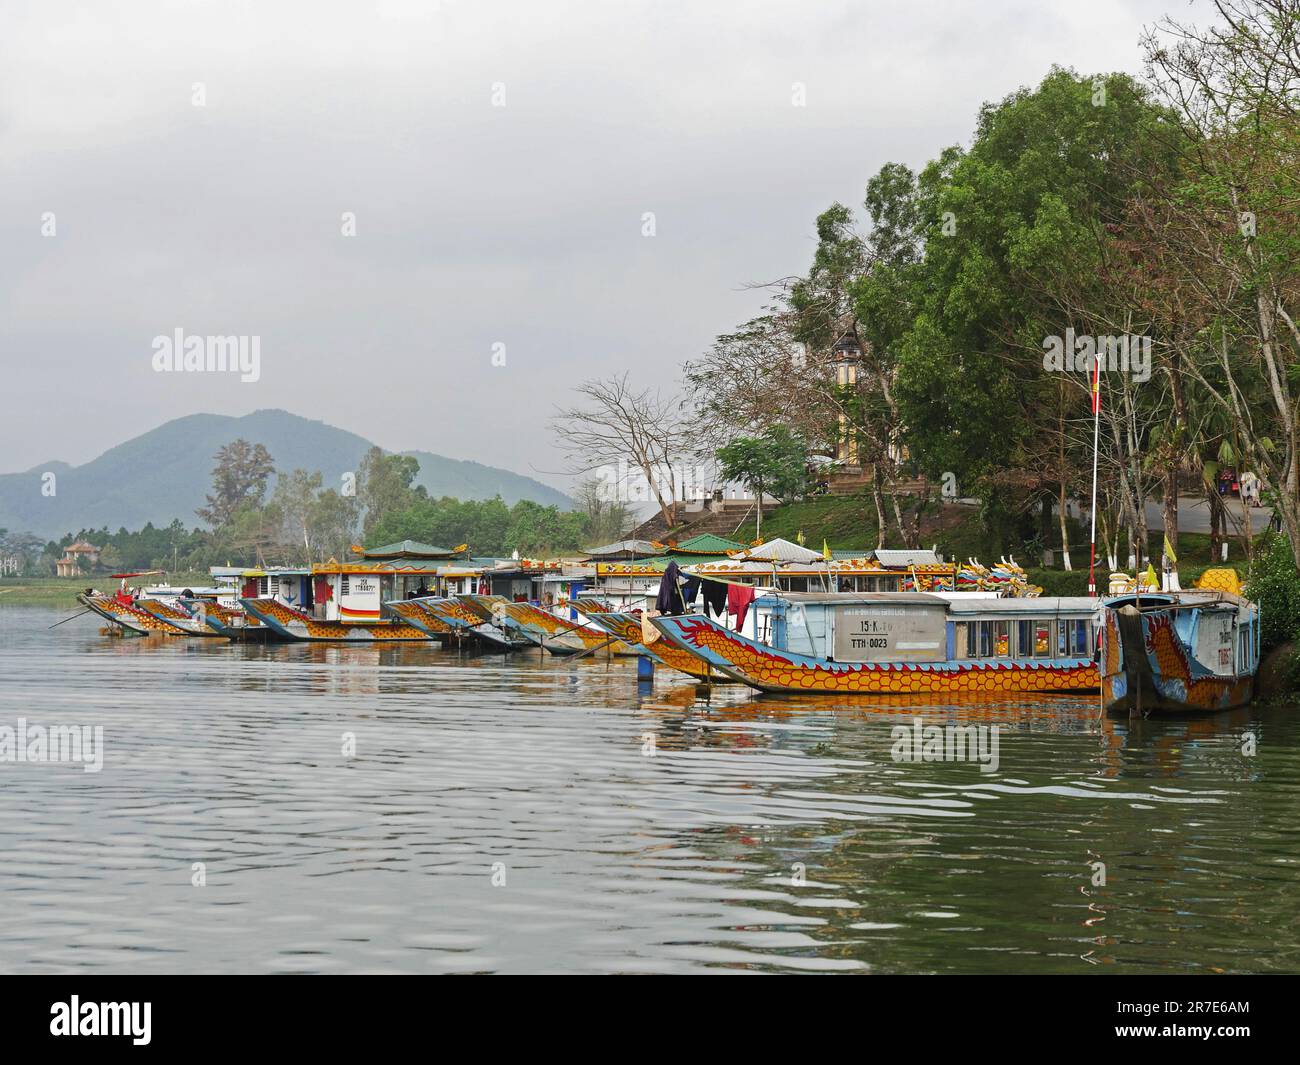 Vietnam, Thua Thien Hue Province, Hue City, listed at World Heritage site by Unesco, The Perfume River Stock Photo